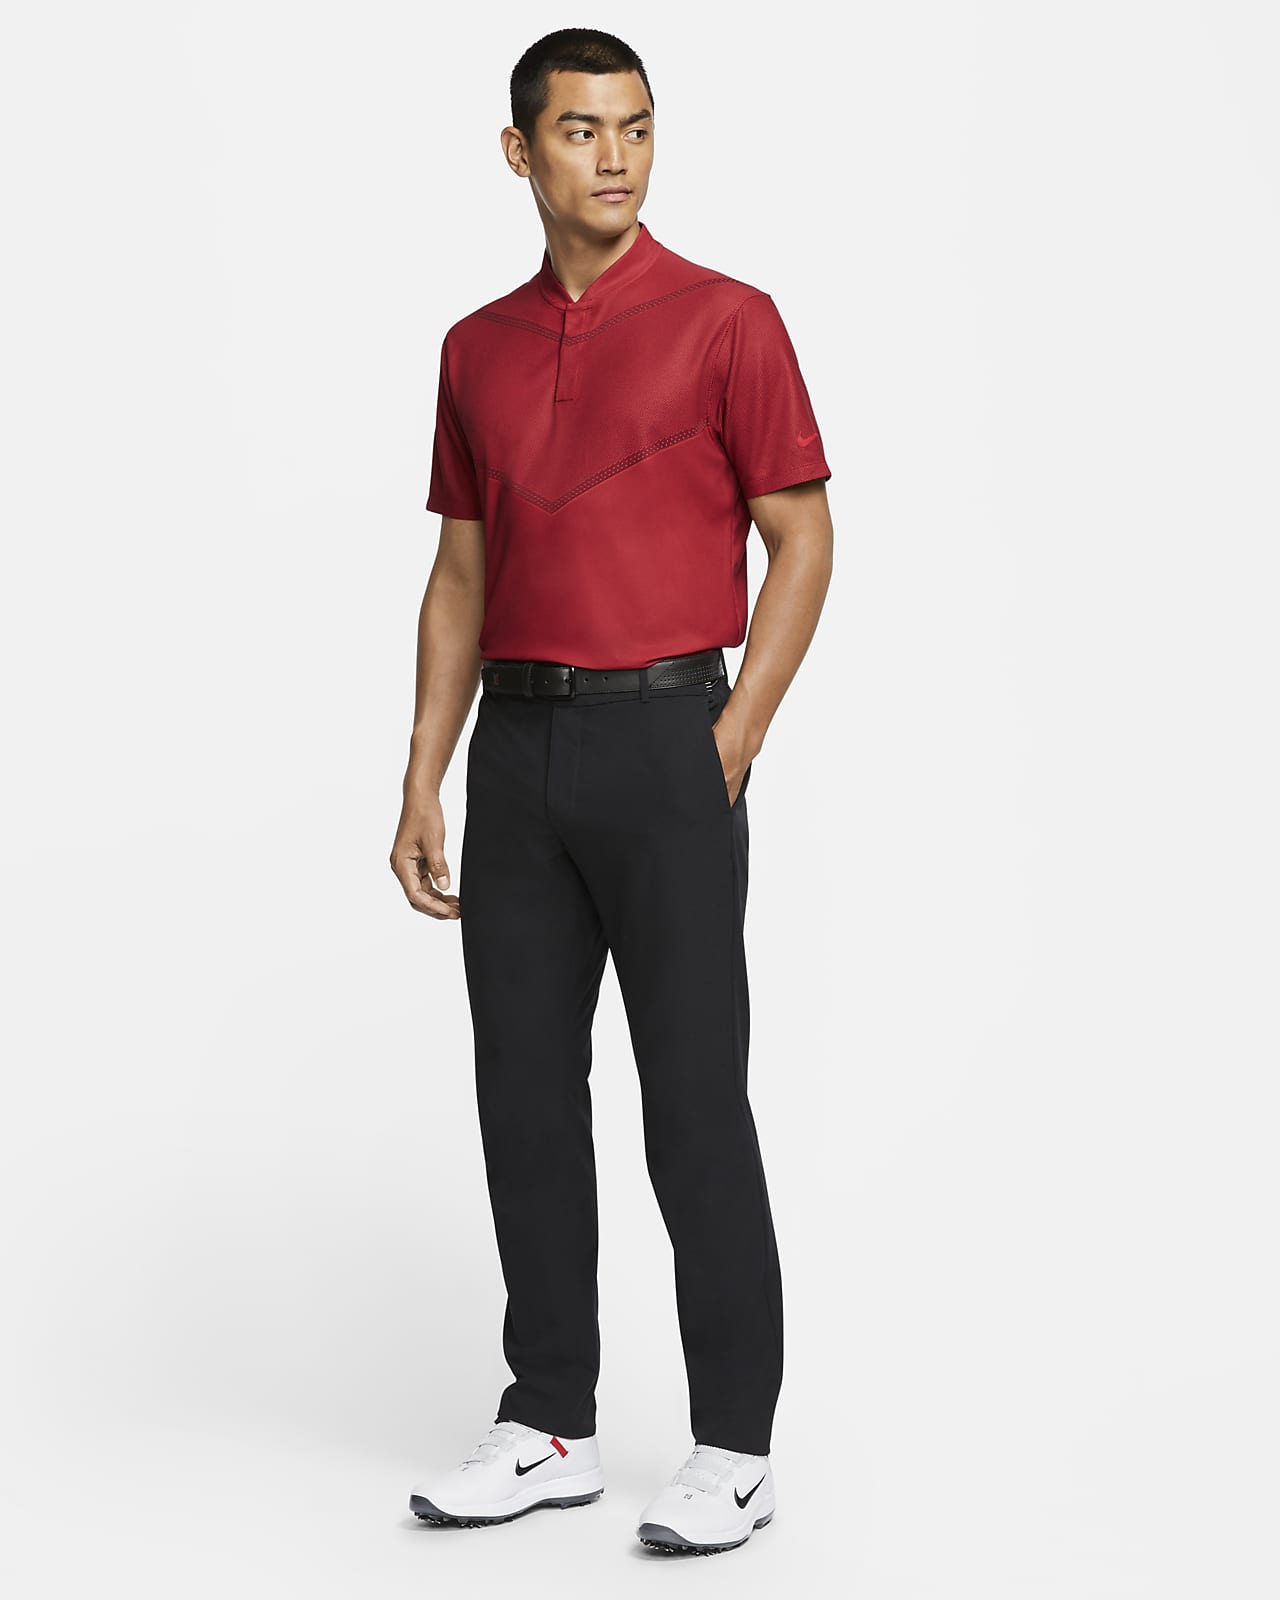 tiger woods clothing